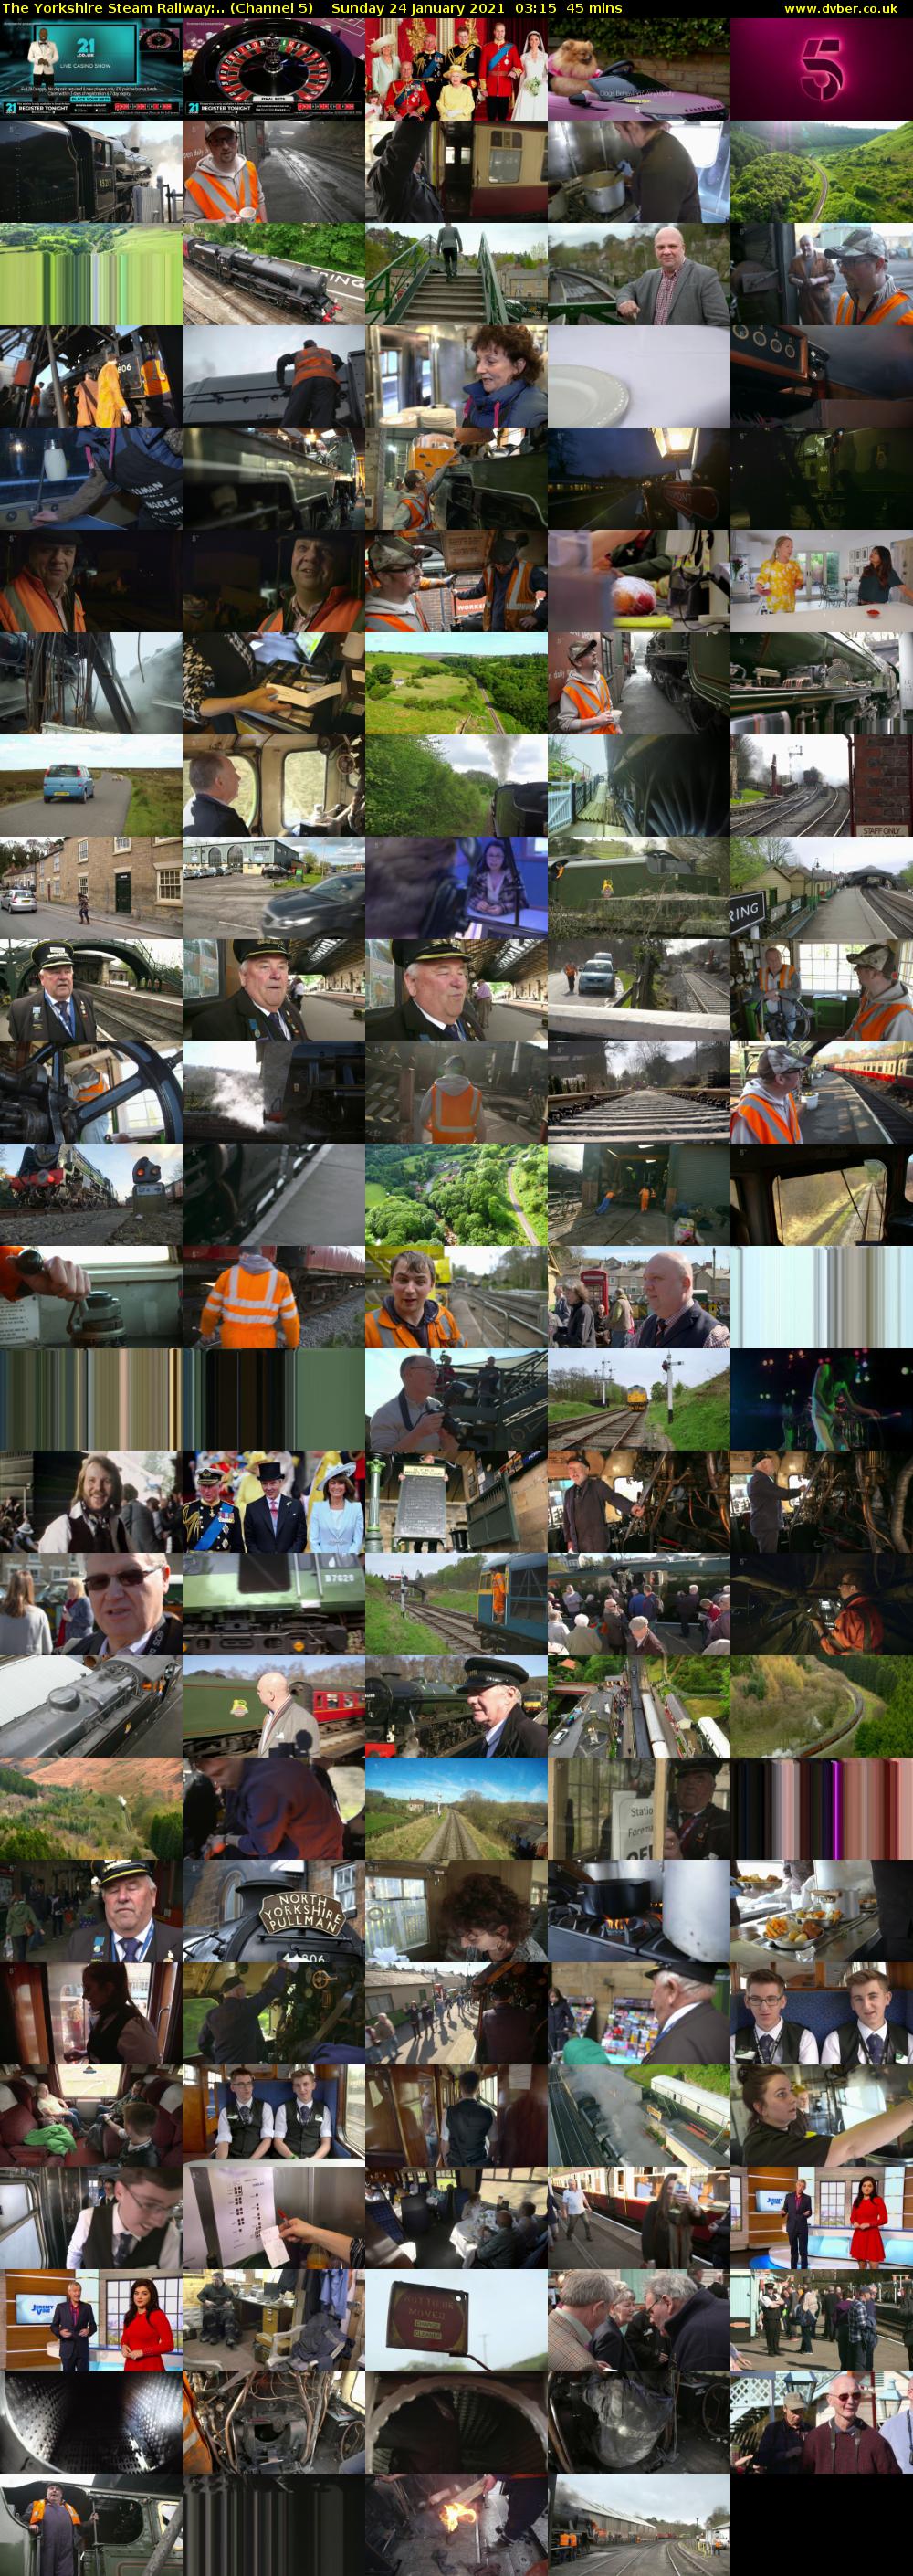 The Yorkshire Steam Railway:.. (Channel 5) Sunday 24 January 2021 03:15 - 04:00